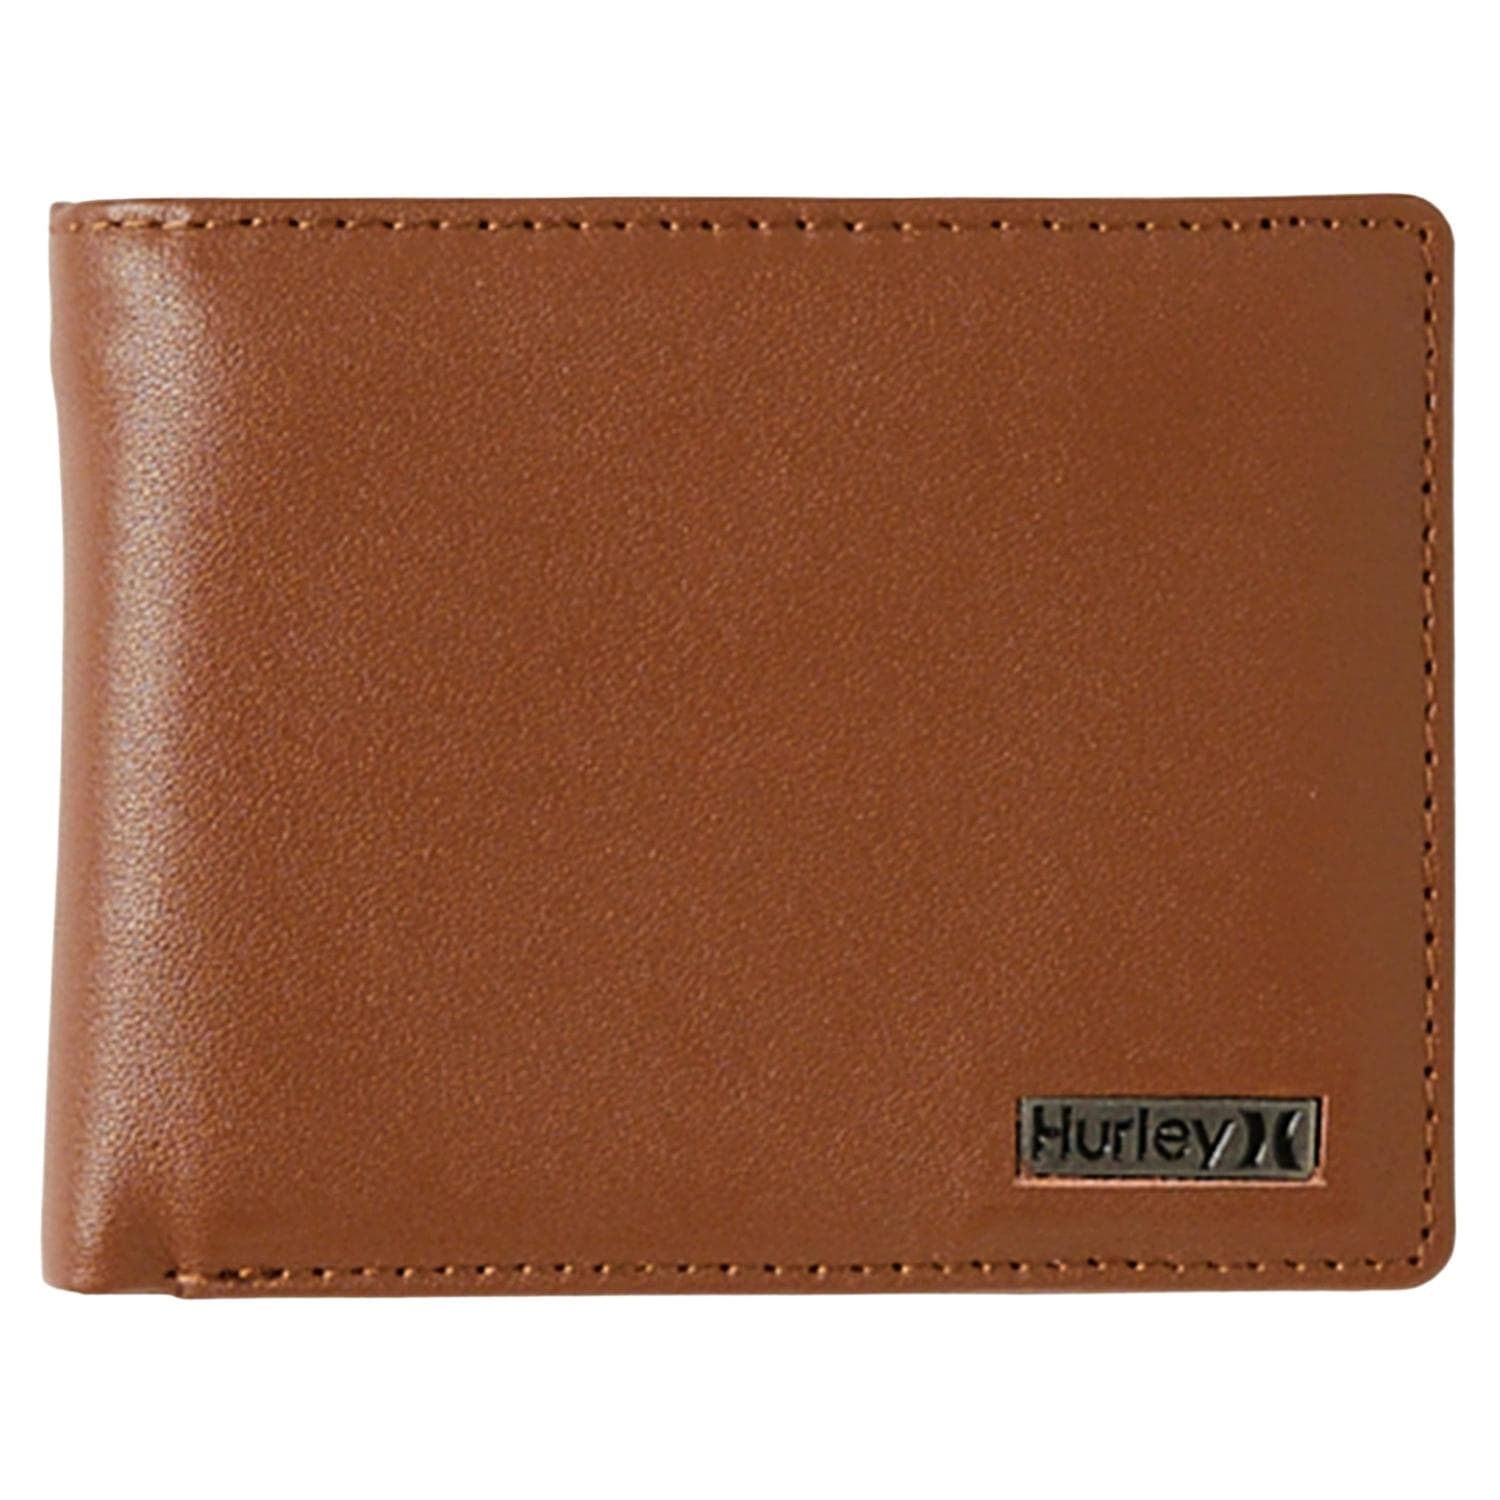 Hurley One & Only Leather Wallet - Tan - Mens Wallet by Hurley